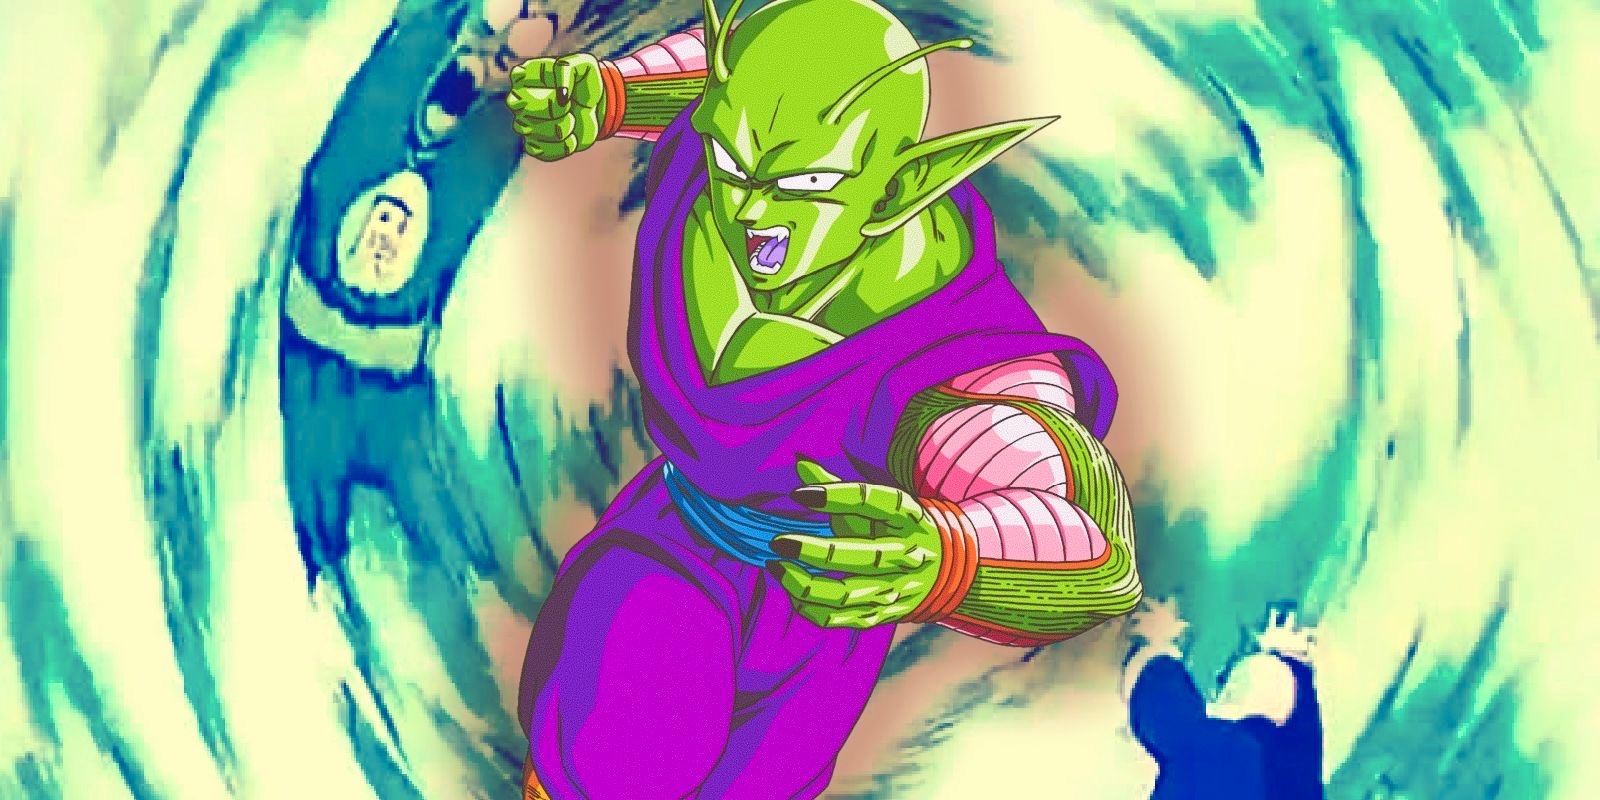 Piccolo ready to attack in front of Master roshi’s evil containment wave in Dragon Ball